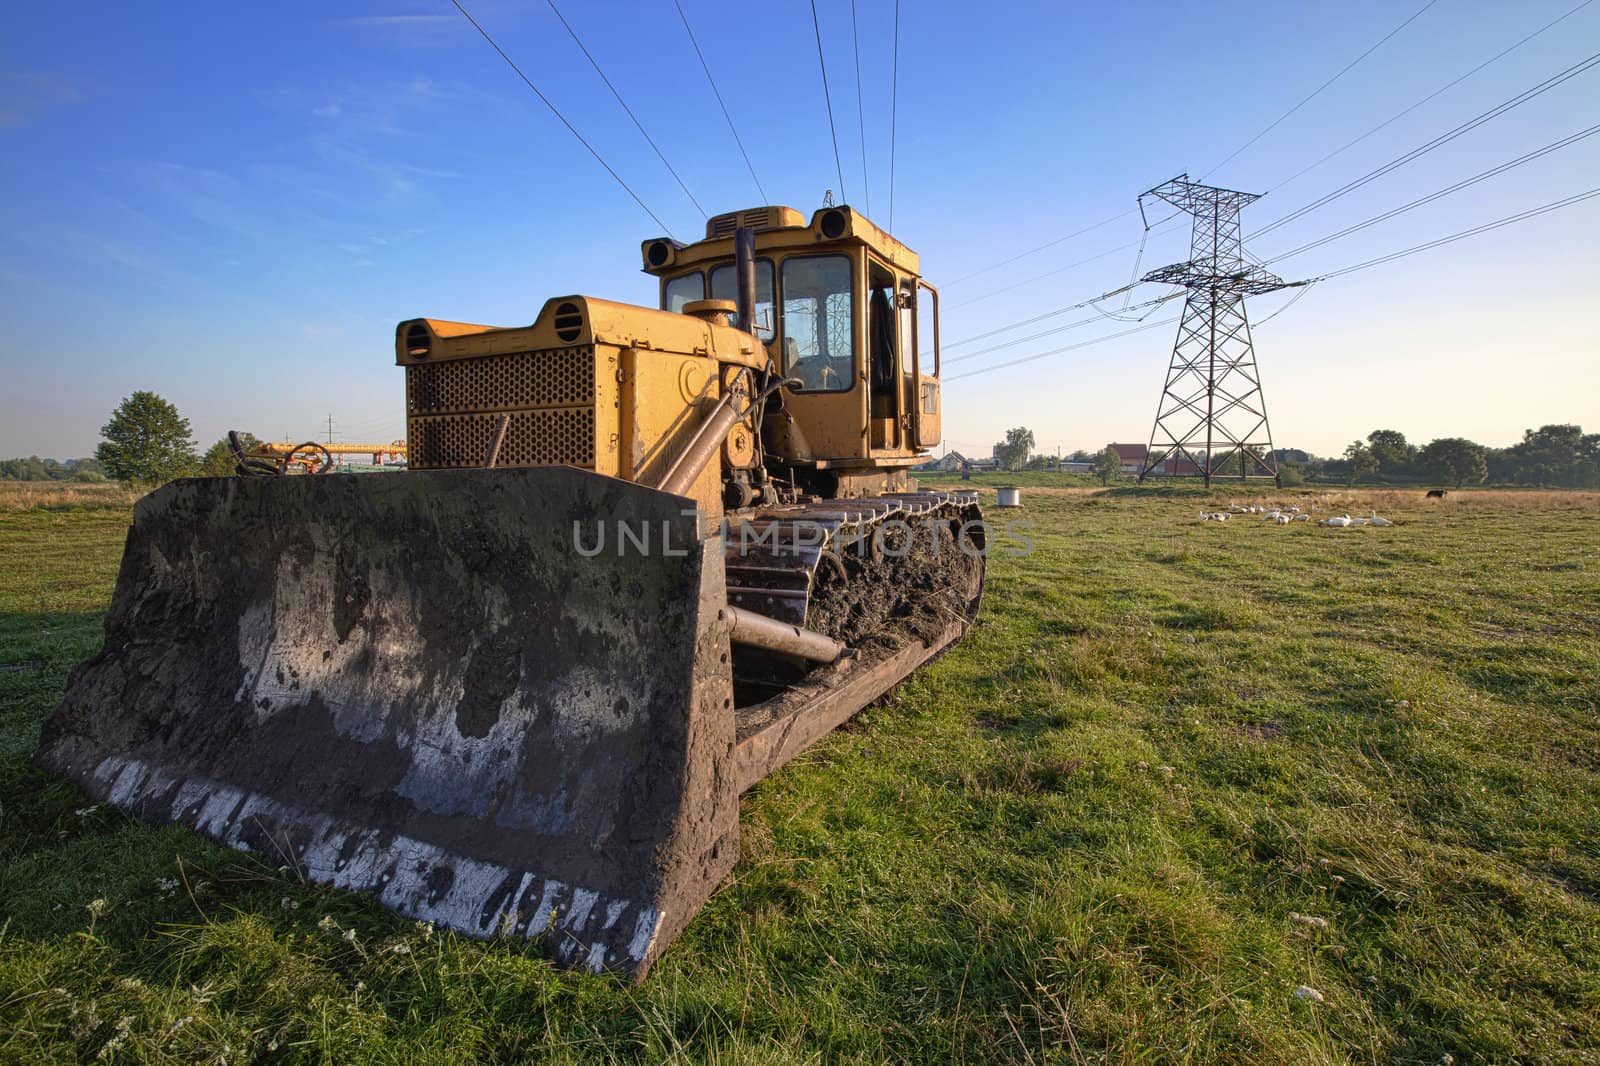 Old dirty yellow bulldozer in front of power lines towers over the blue sky